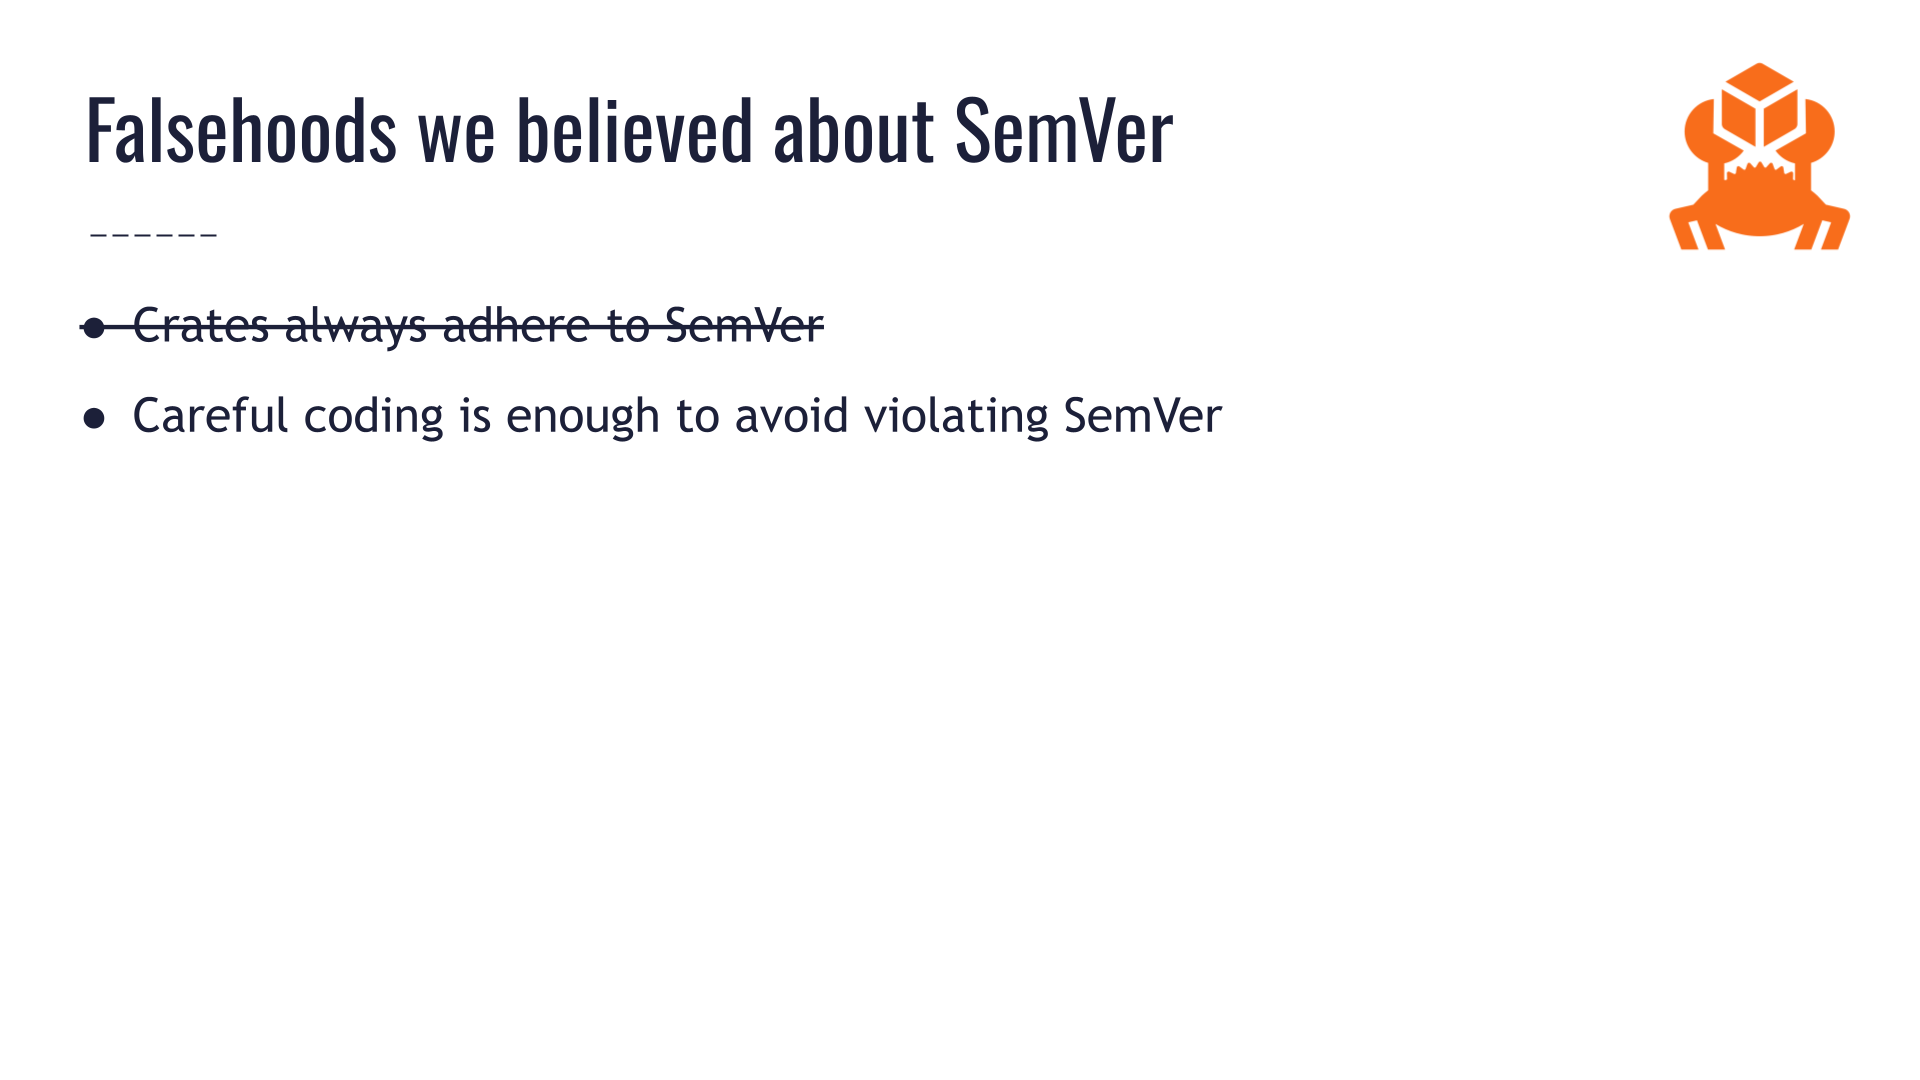 The same slide titled "Falsehoods we believed about SemVer" from earlier. The first bullet point, "crates always adhere to SemVer," is crossed off. The next bullet point says: "Careful coding is enough to avoid violating SemVer."